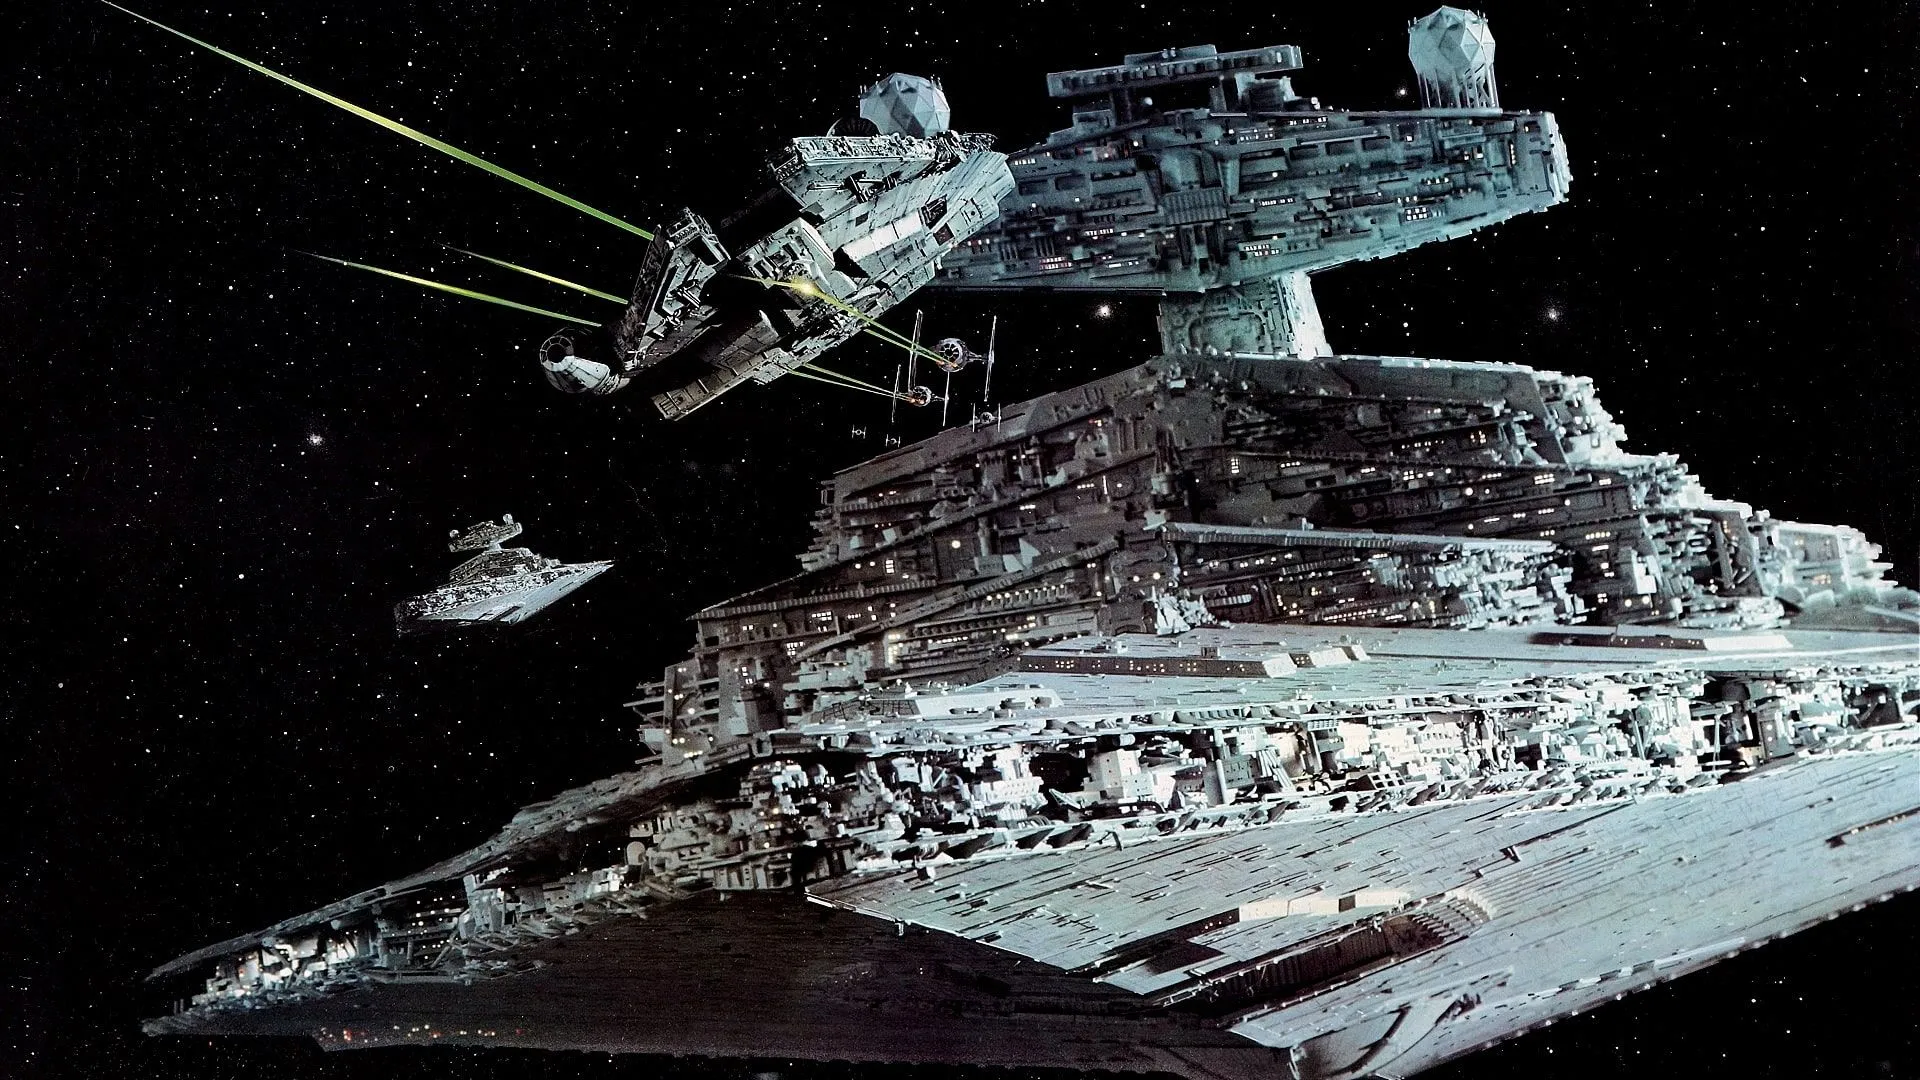 Image from The Empire Strikes Back